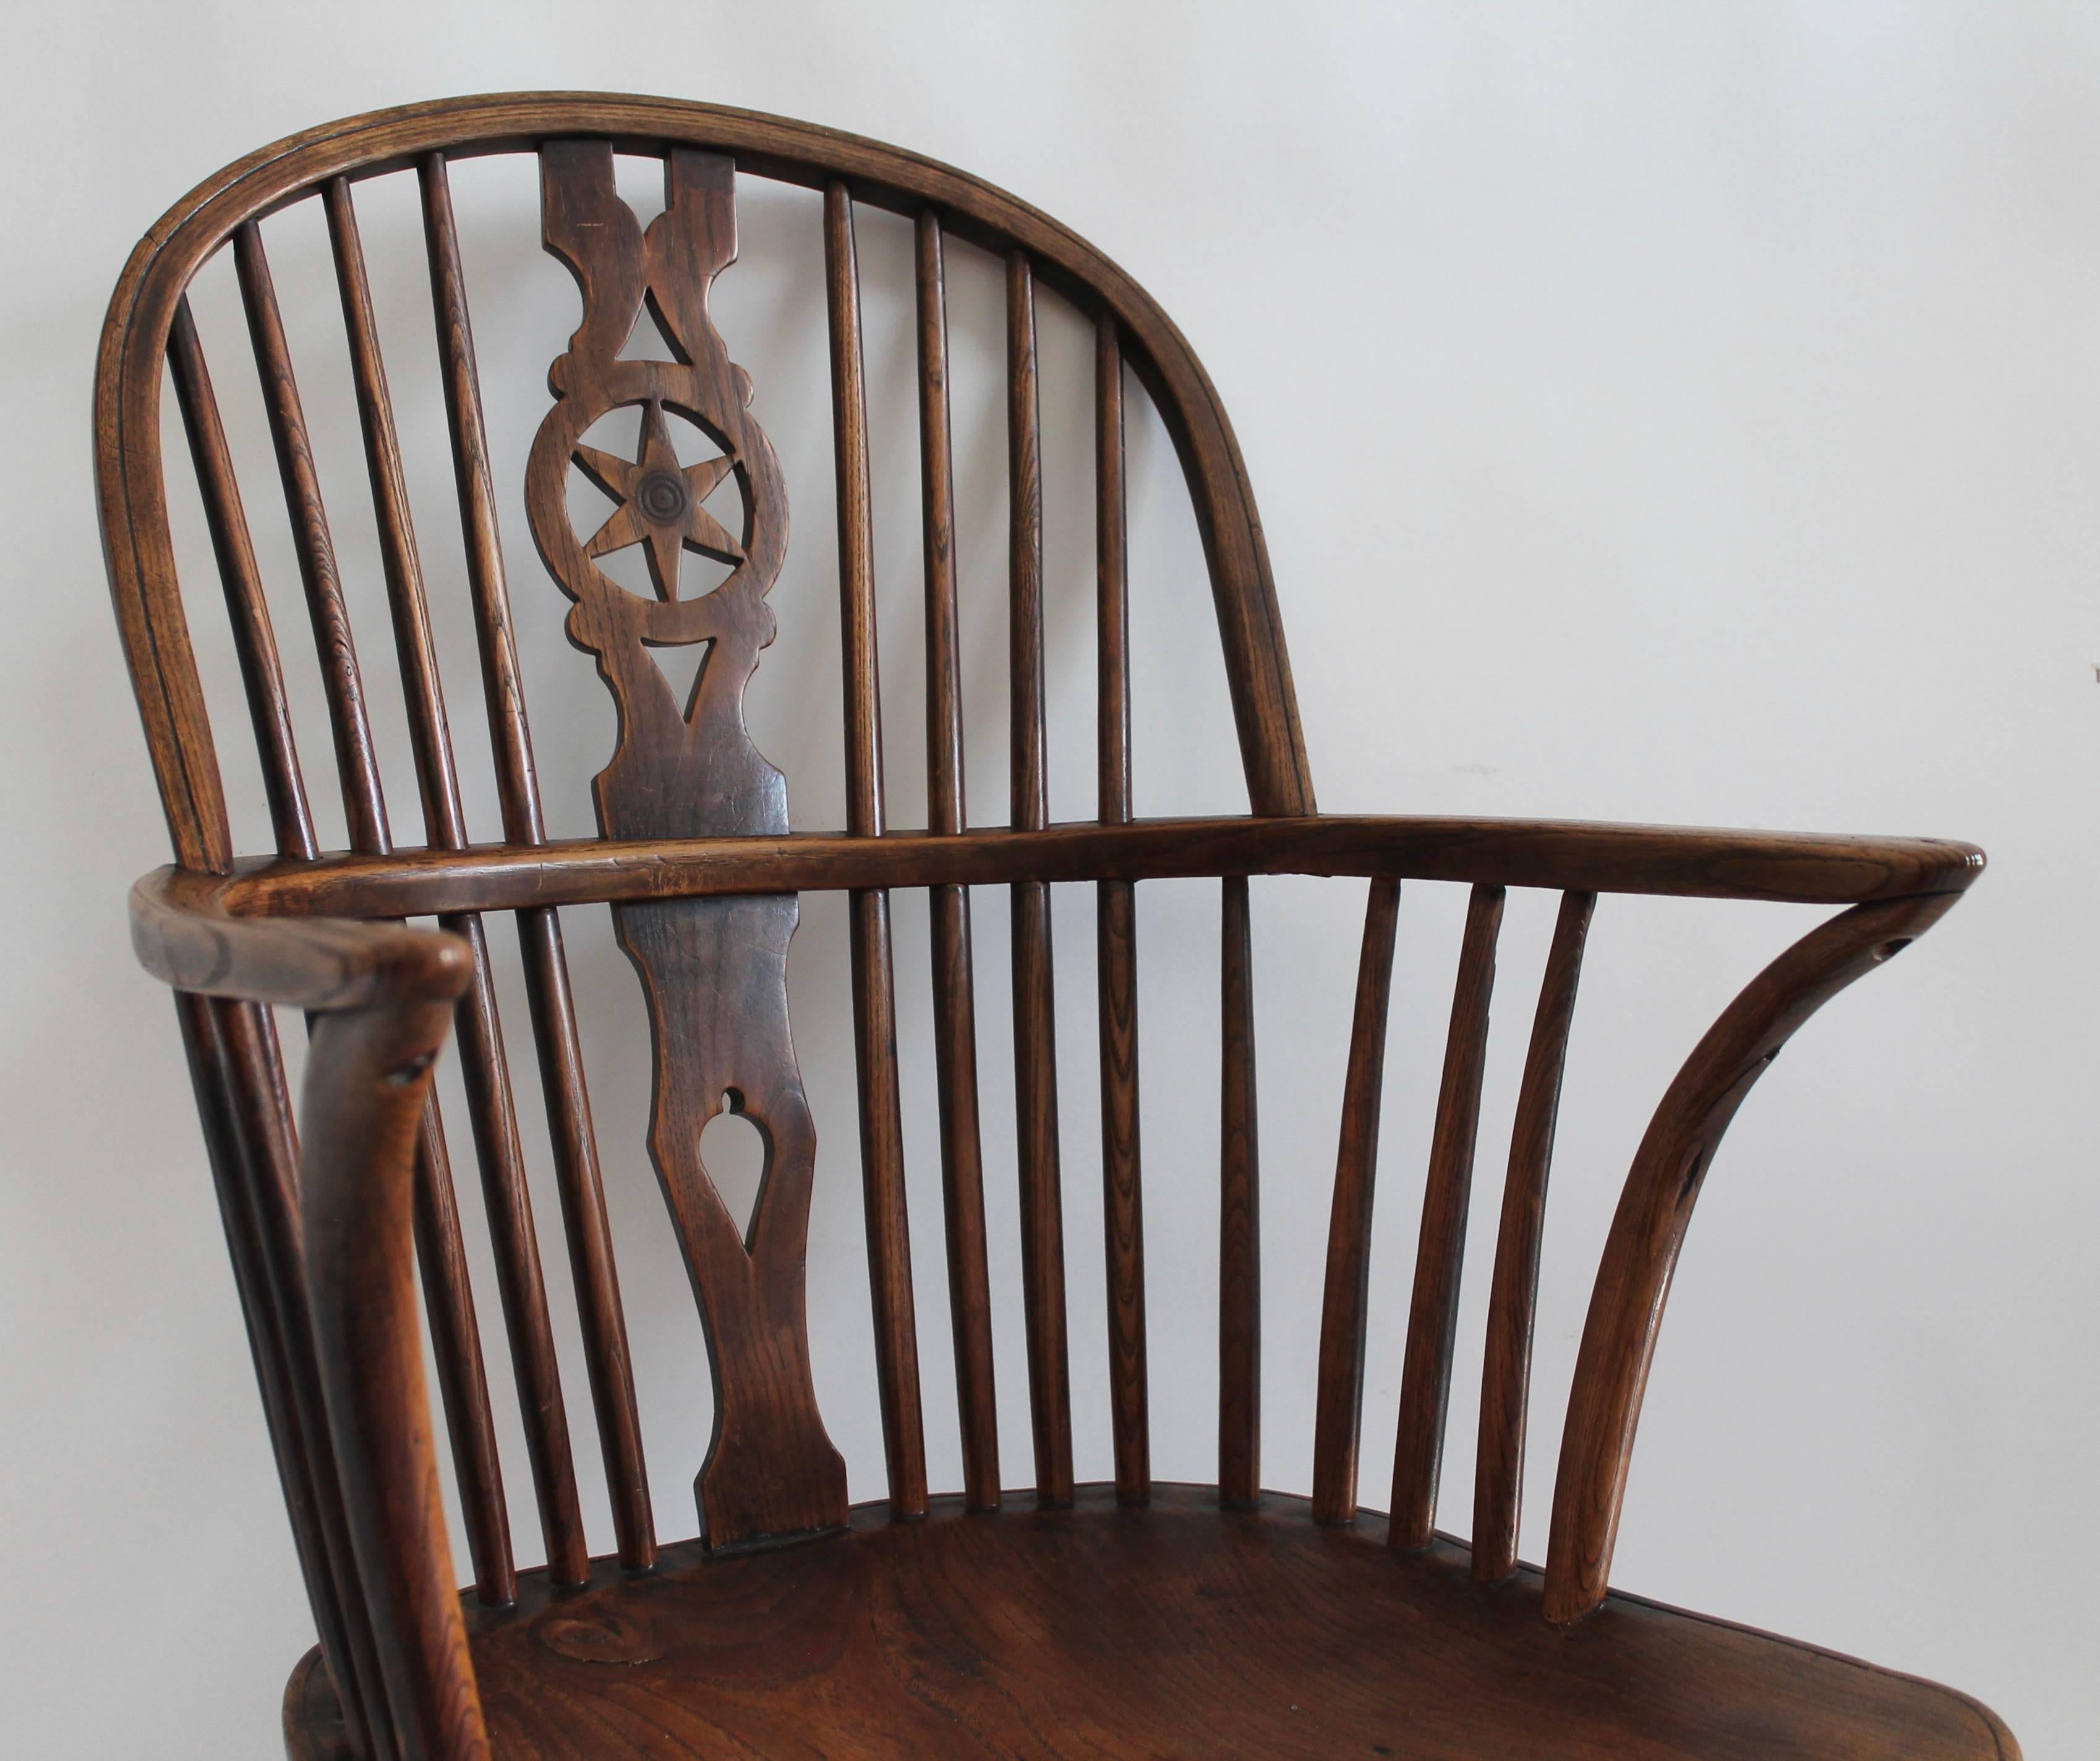 Early 19th century amazing Windsor chair with star cut-out on back splash of chair. This extended arm Windsor chair is very comfortable and has a amazing patina.